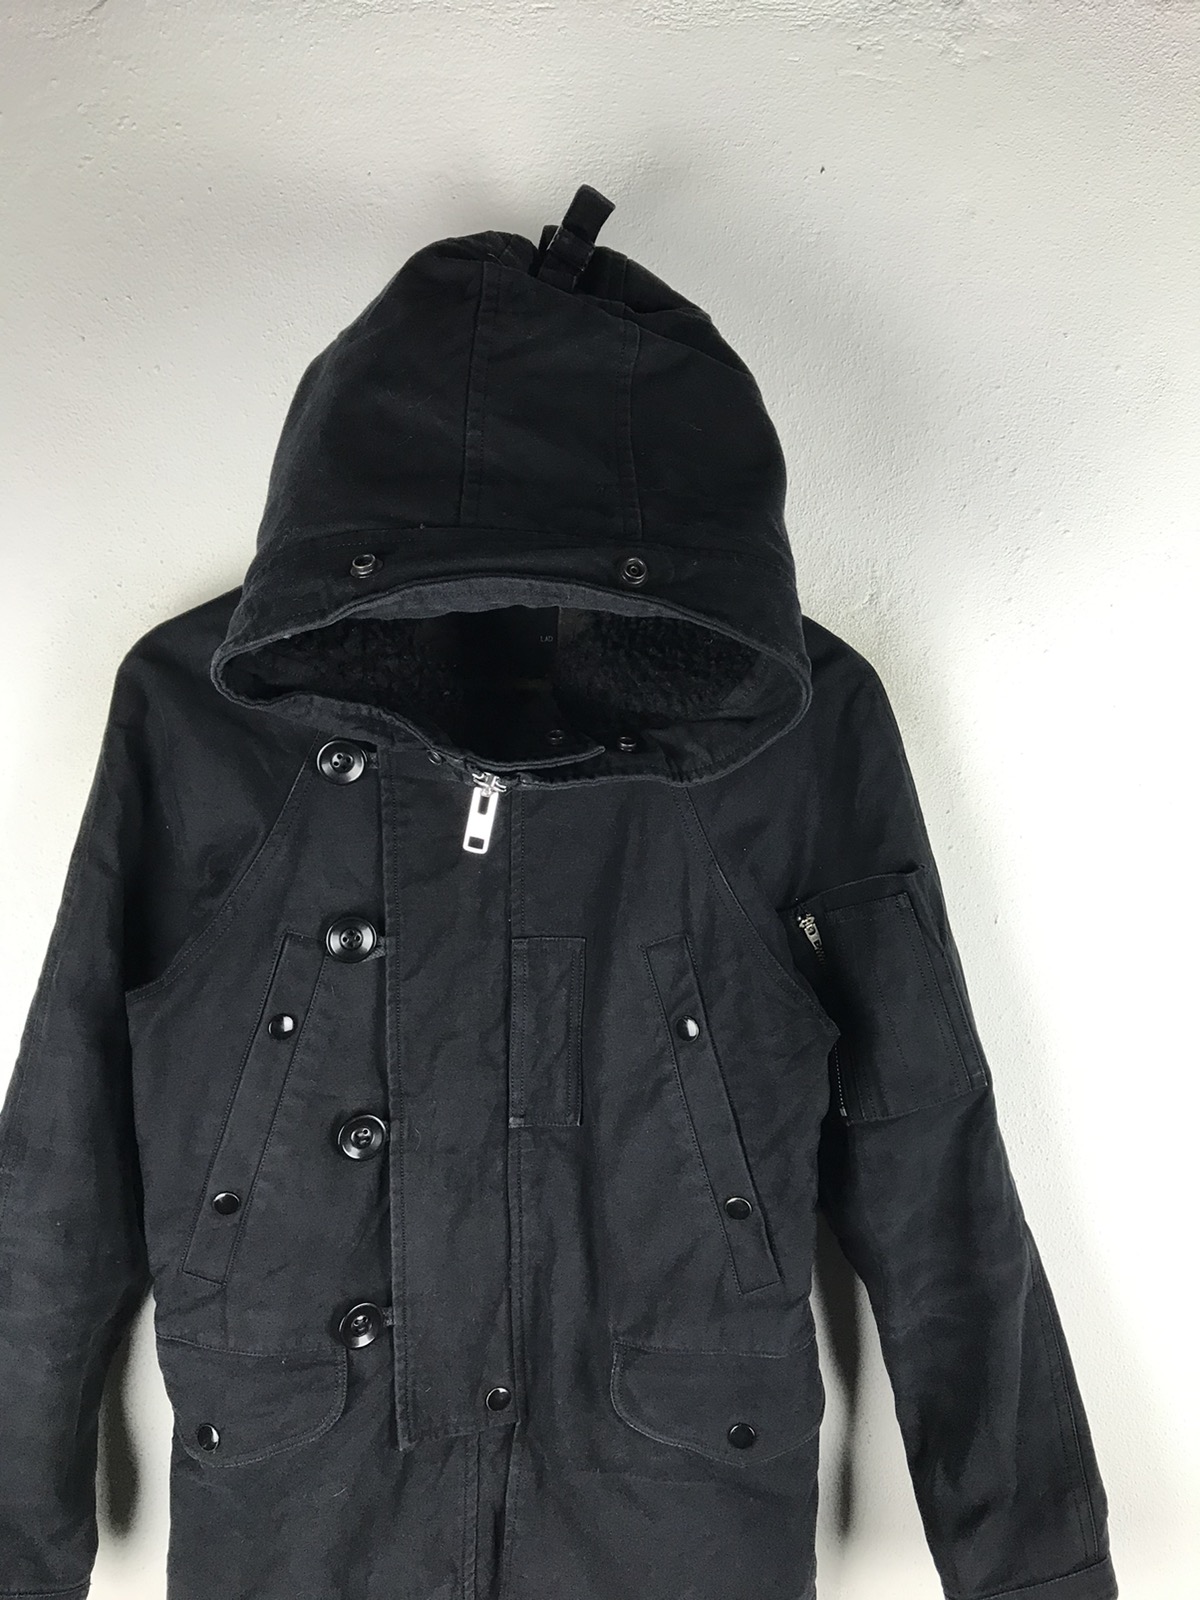 Other Designers Lad Musician - LAD MUSICIAN PARKA STYLE JACKET 